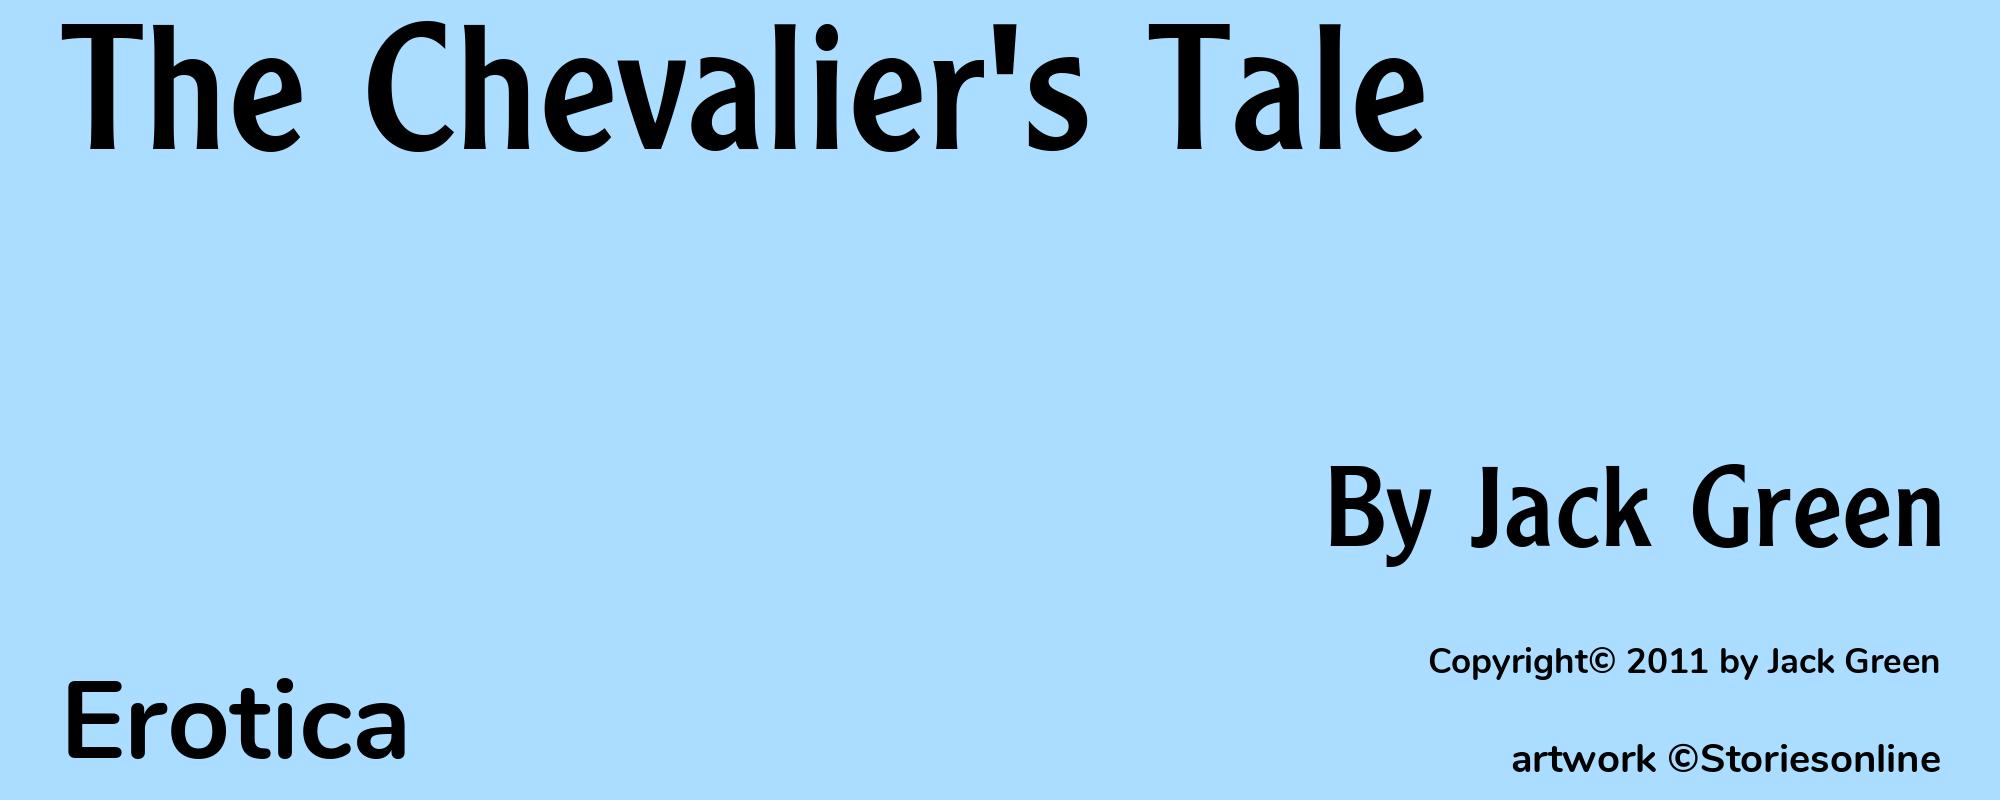 The Chevalier's Tale - Cover